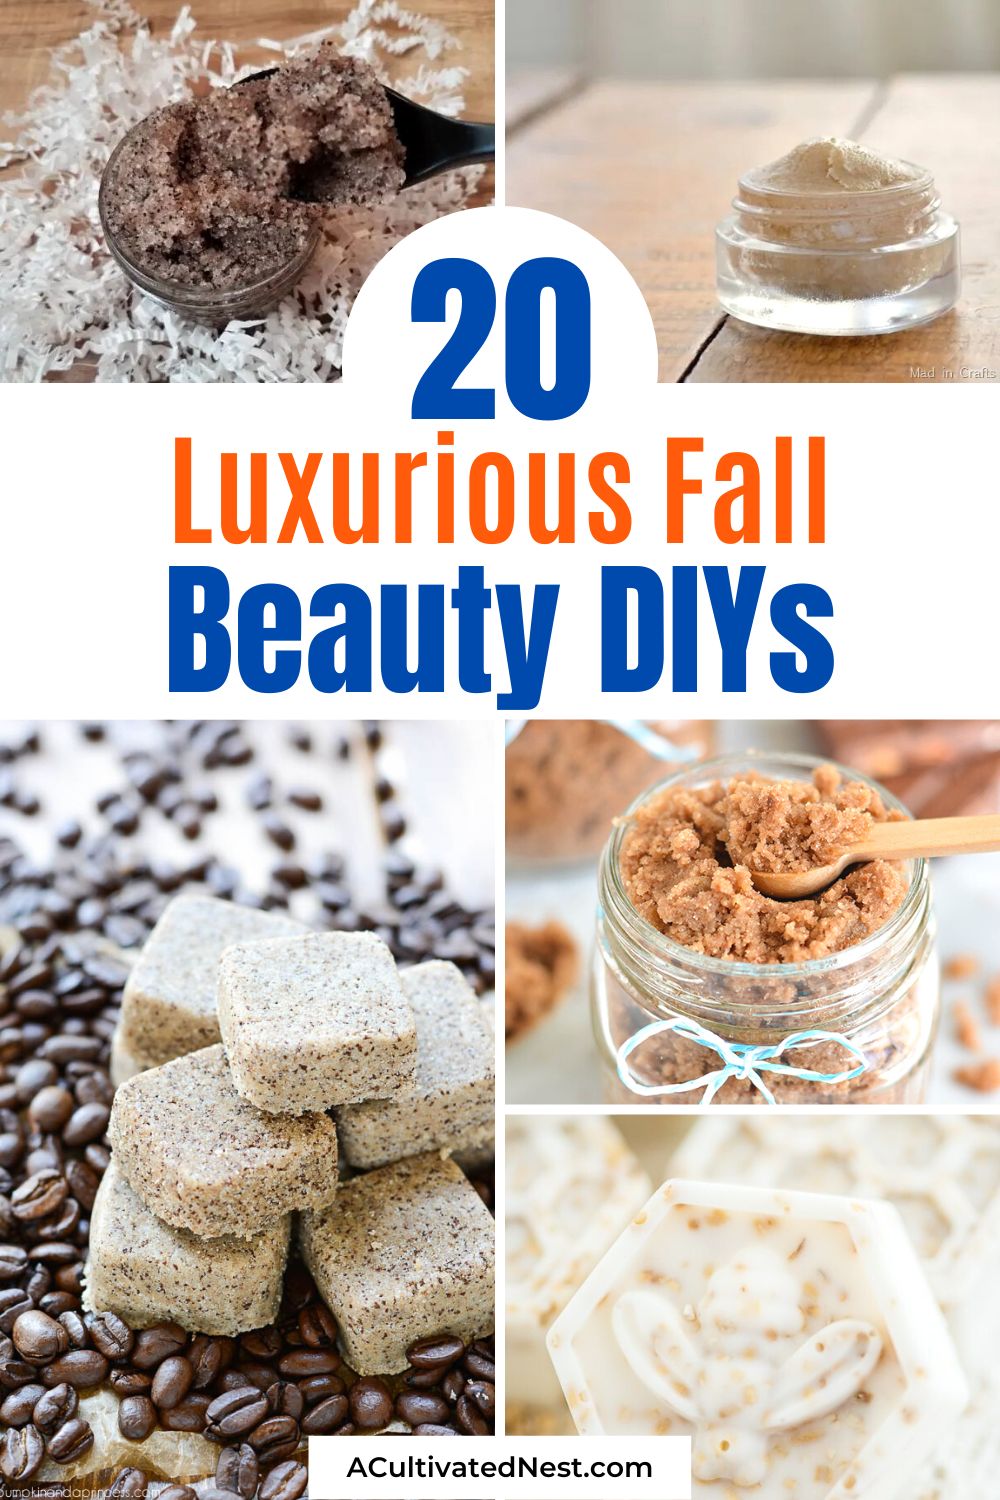 20 Luxurious Fall Beauty DIYs- The weather is cooling down, so here are some luxurious fall beauty DIYs to keep your skin feeling and looking great despite the harsh fall and winter weather! | DIY sugar scrubs, DIY body scrubs, homemade beauty products, #beautyDIY #homemadeBeautyProdcuts #DIY #sugarScrubs #ACultivatedNest